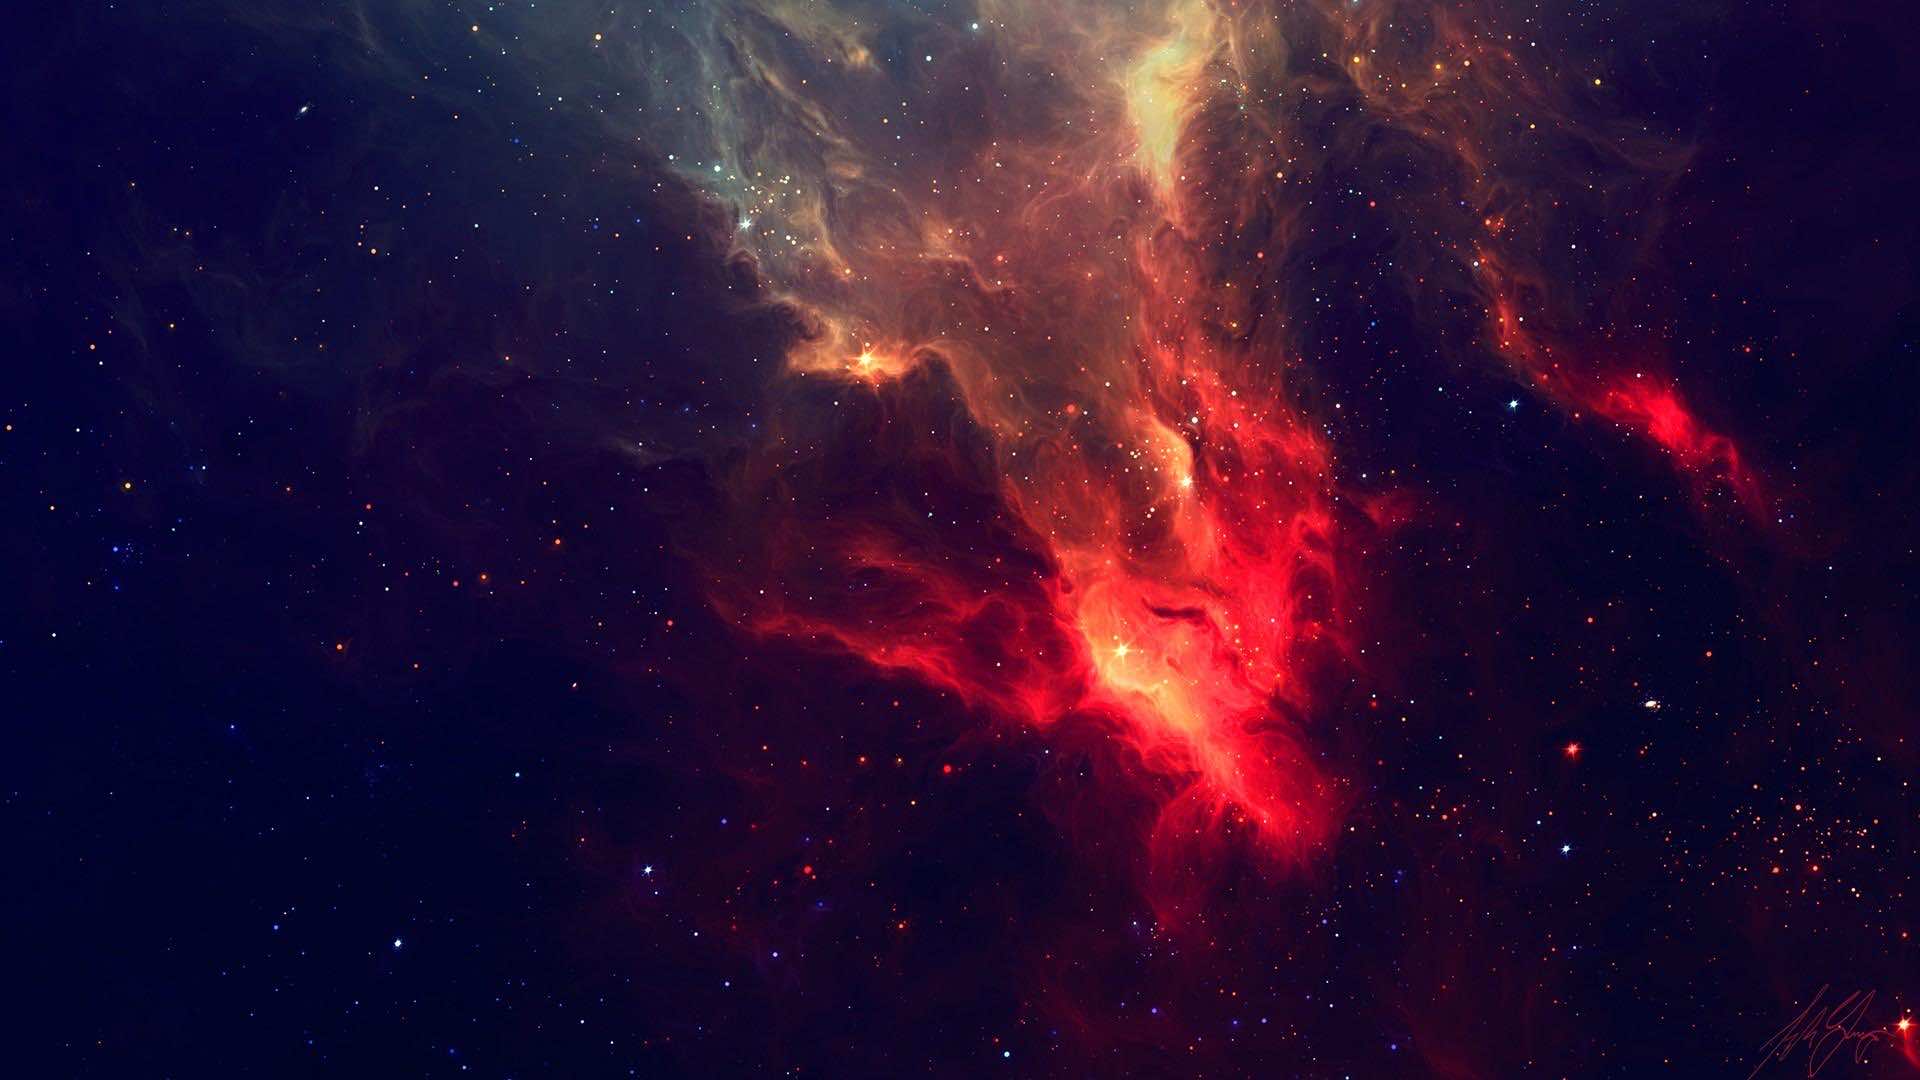 35 Hd Galaxy Wallpapers For Free Download